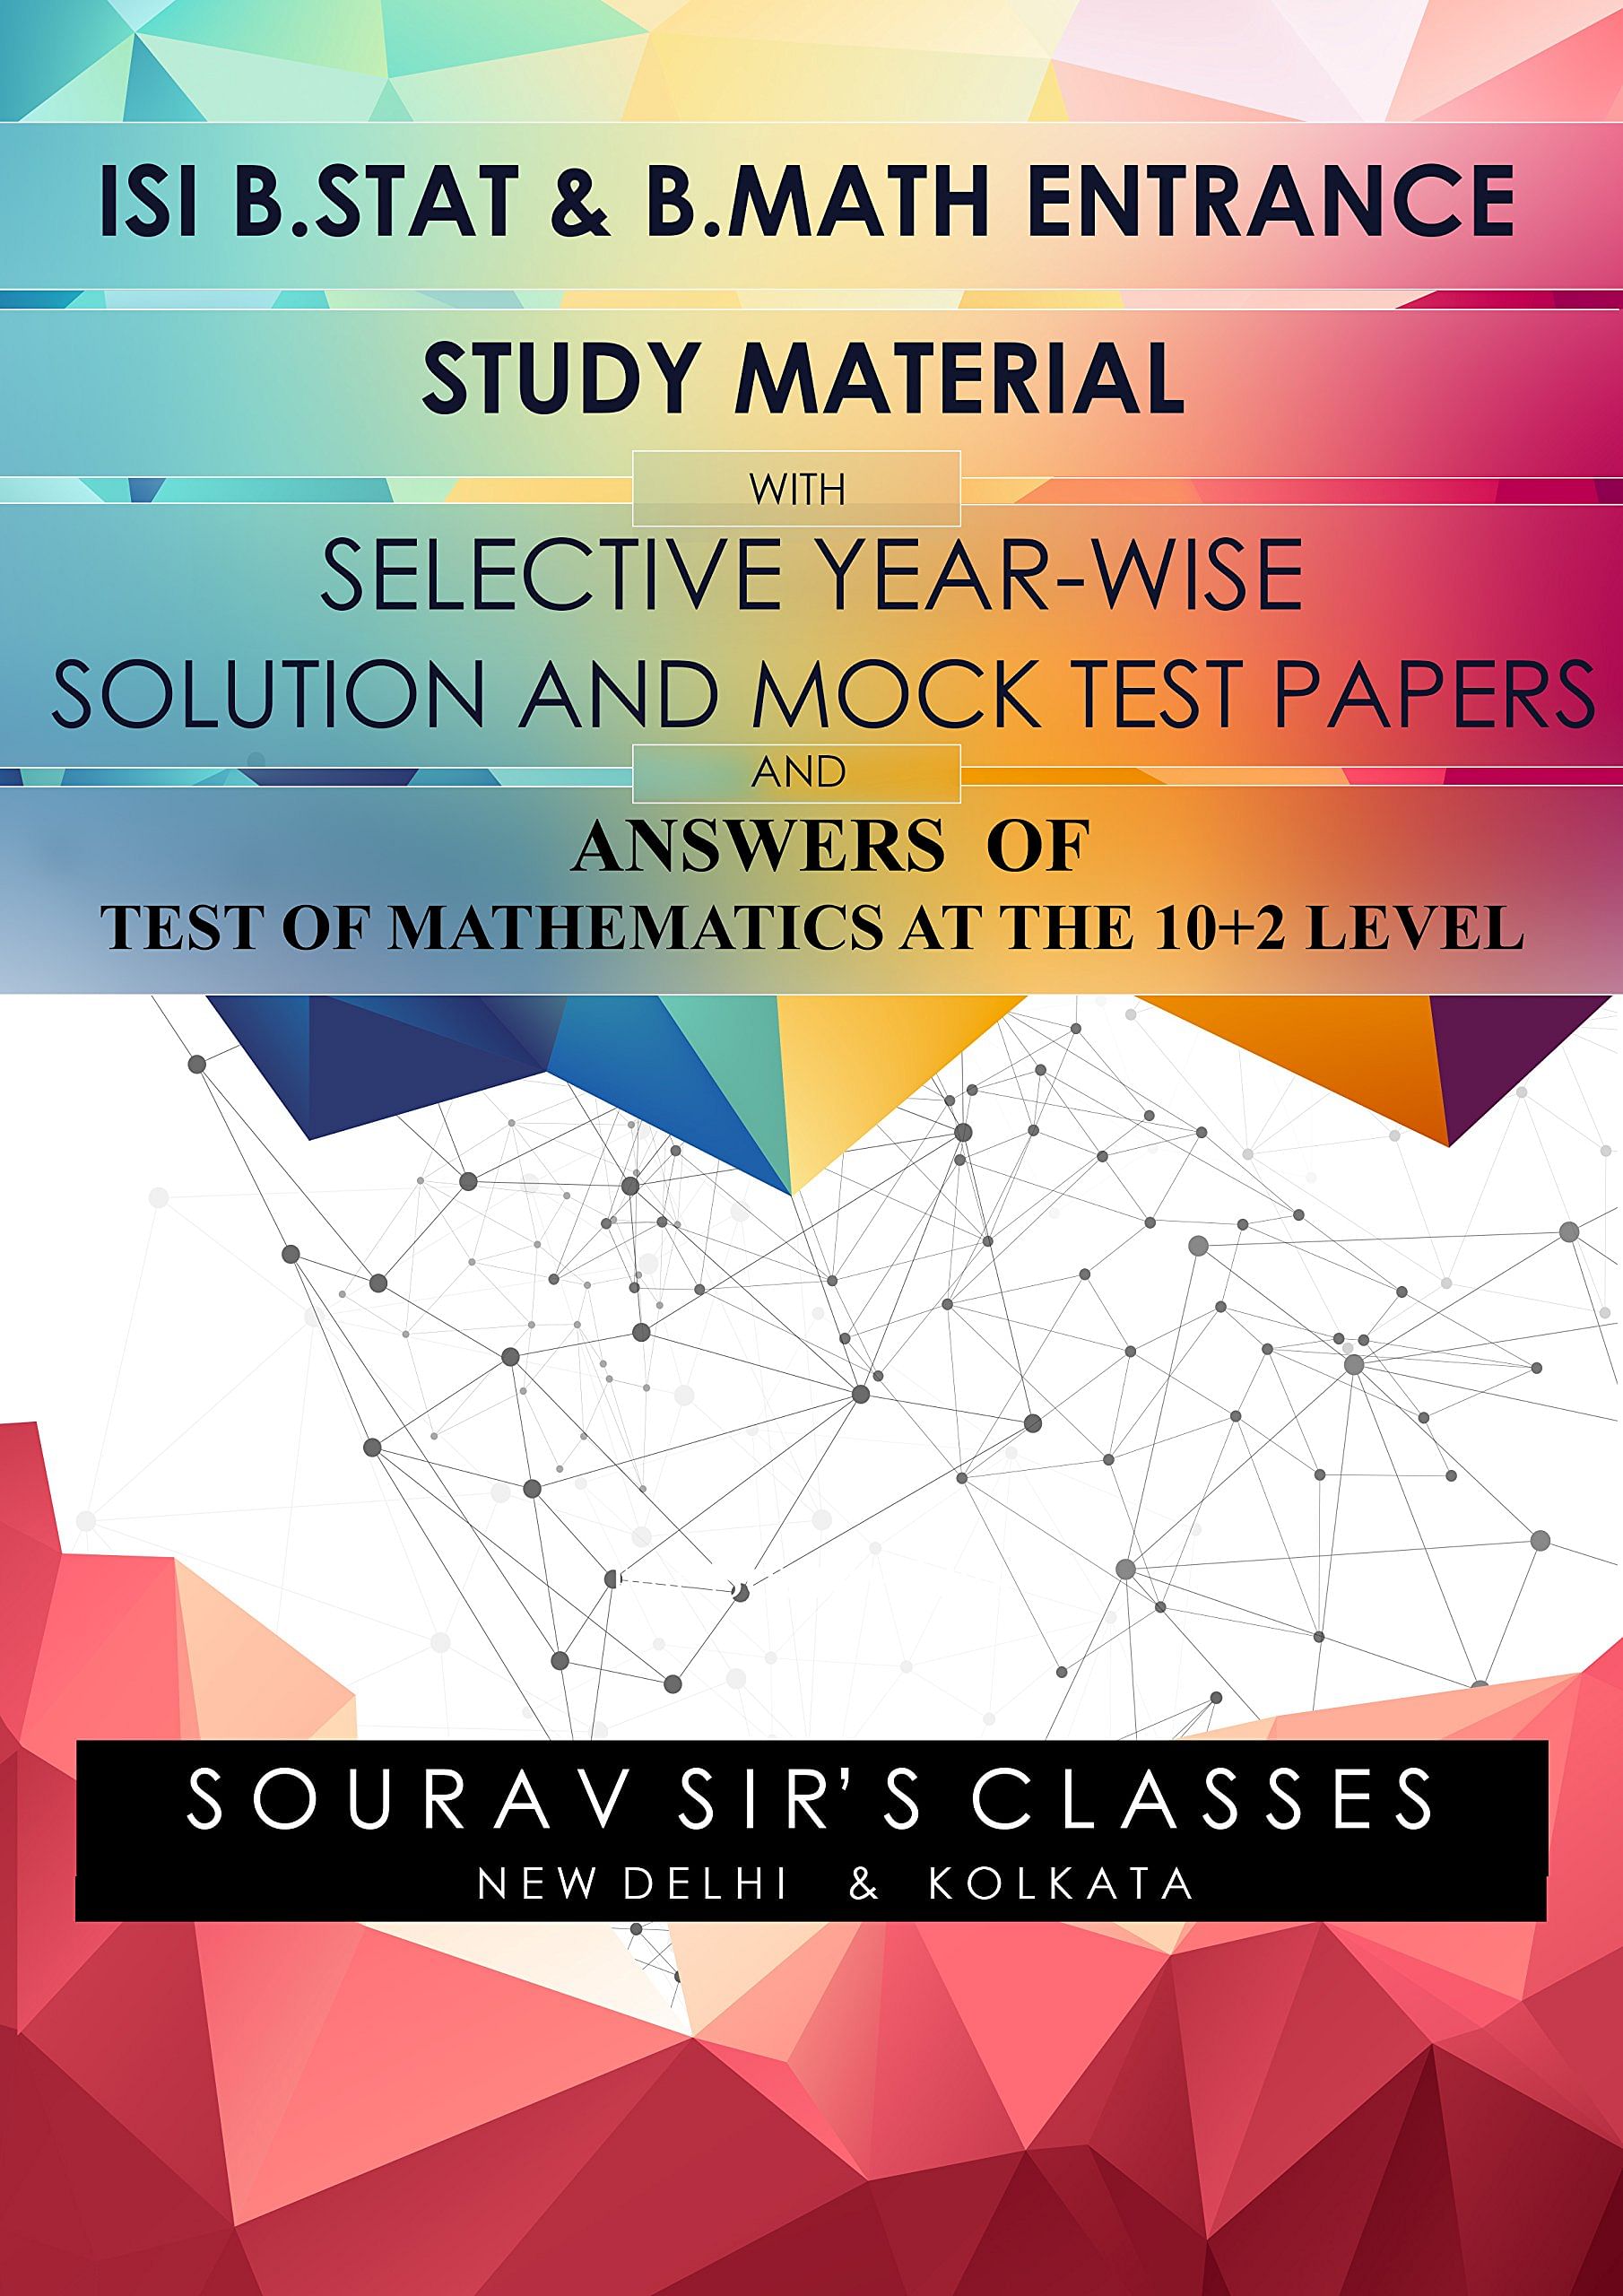 ISI Entance Exam Solved Papers for B Stat / BMath